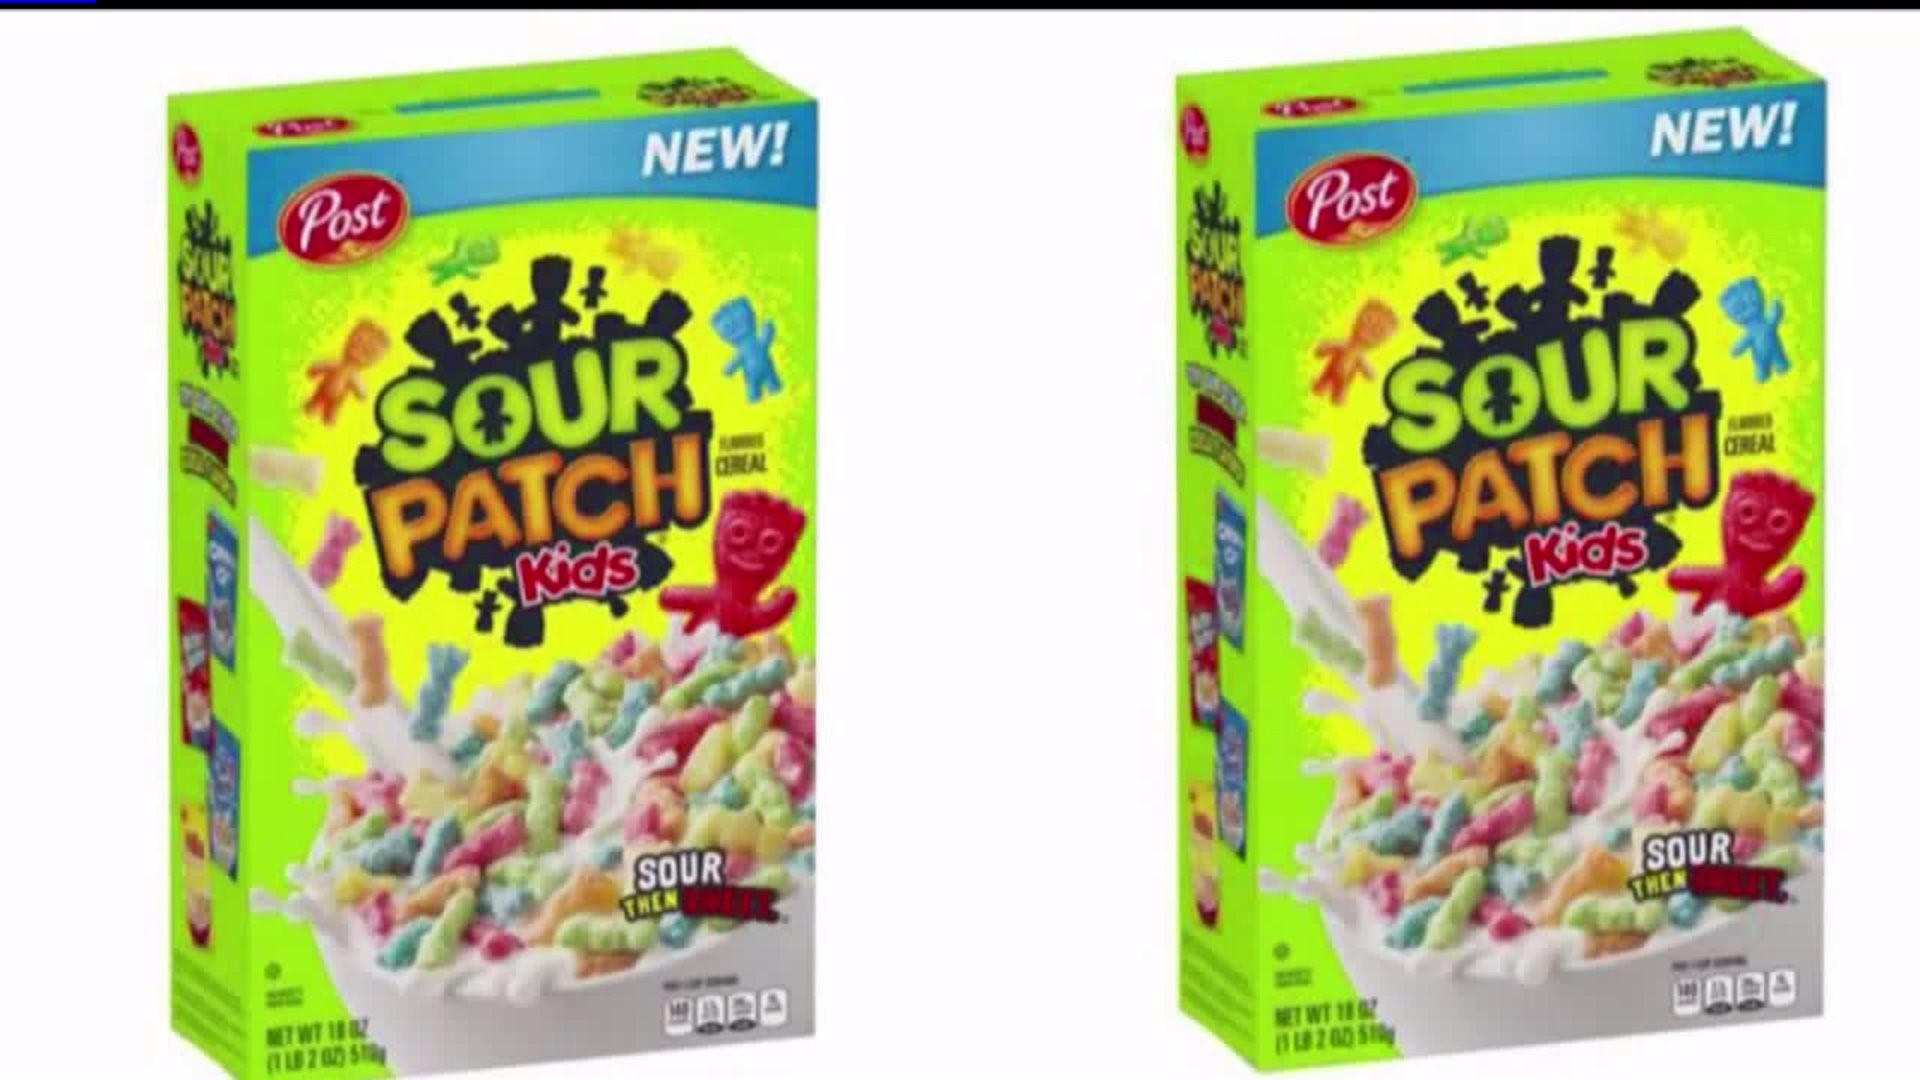 New Sour Patch breakfast hits shelves